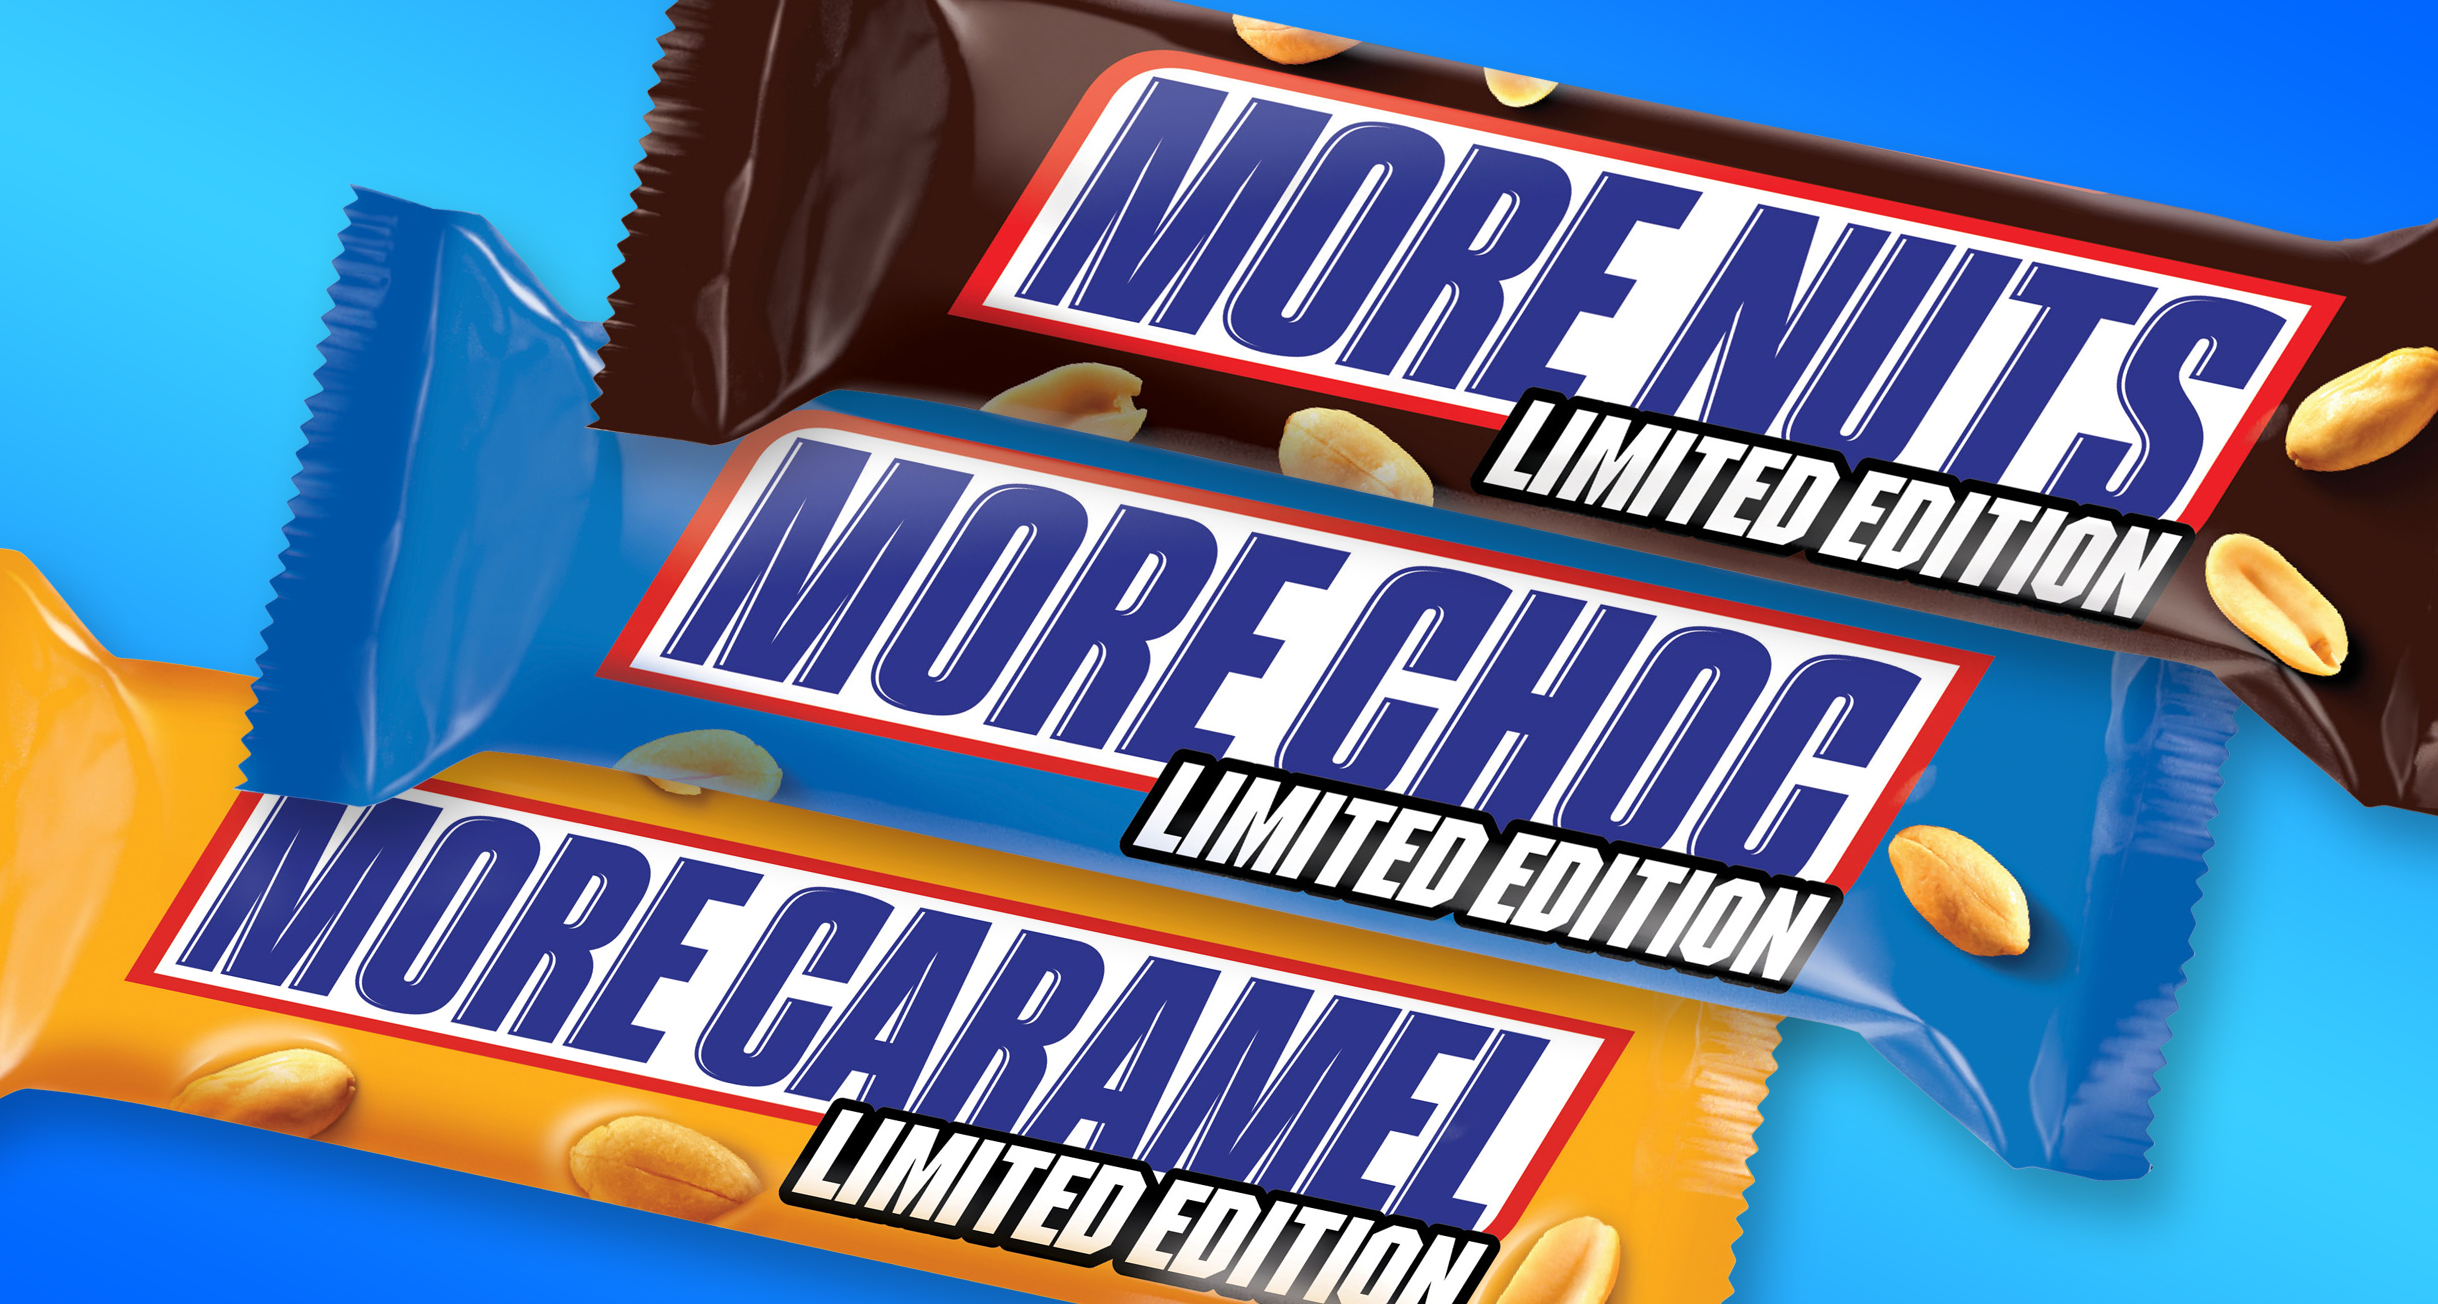 Snickers More Nuts Limited Edition